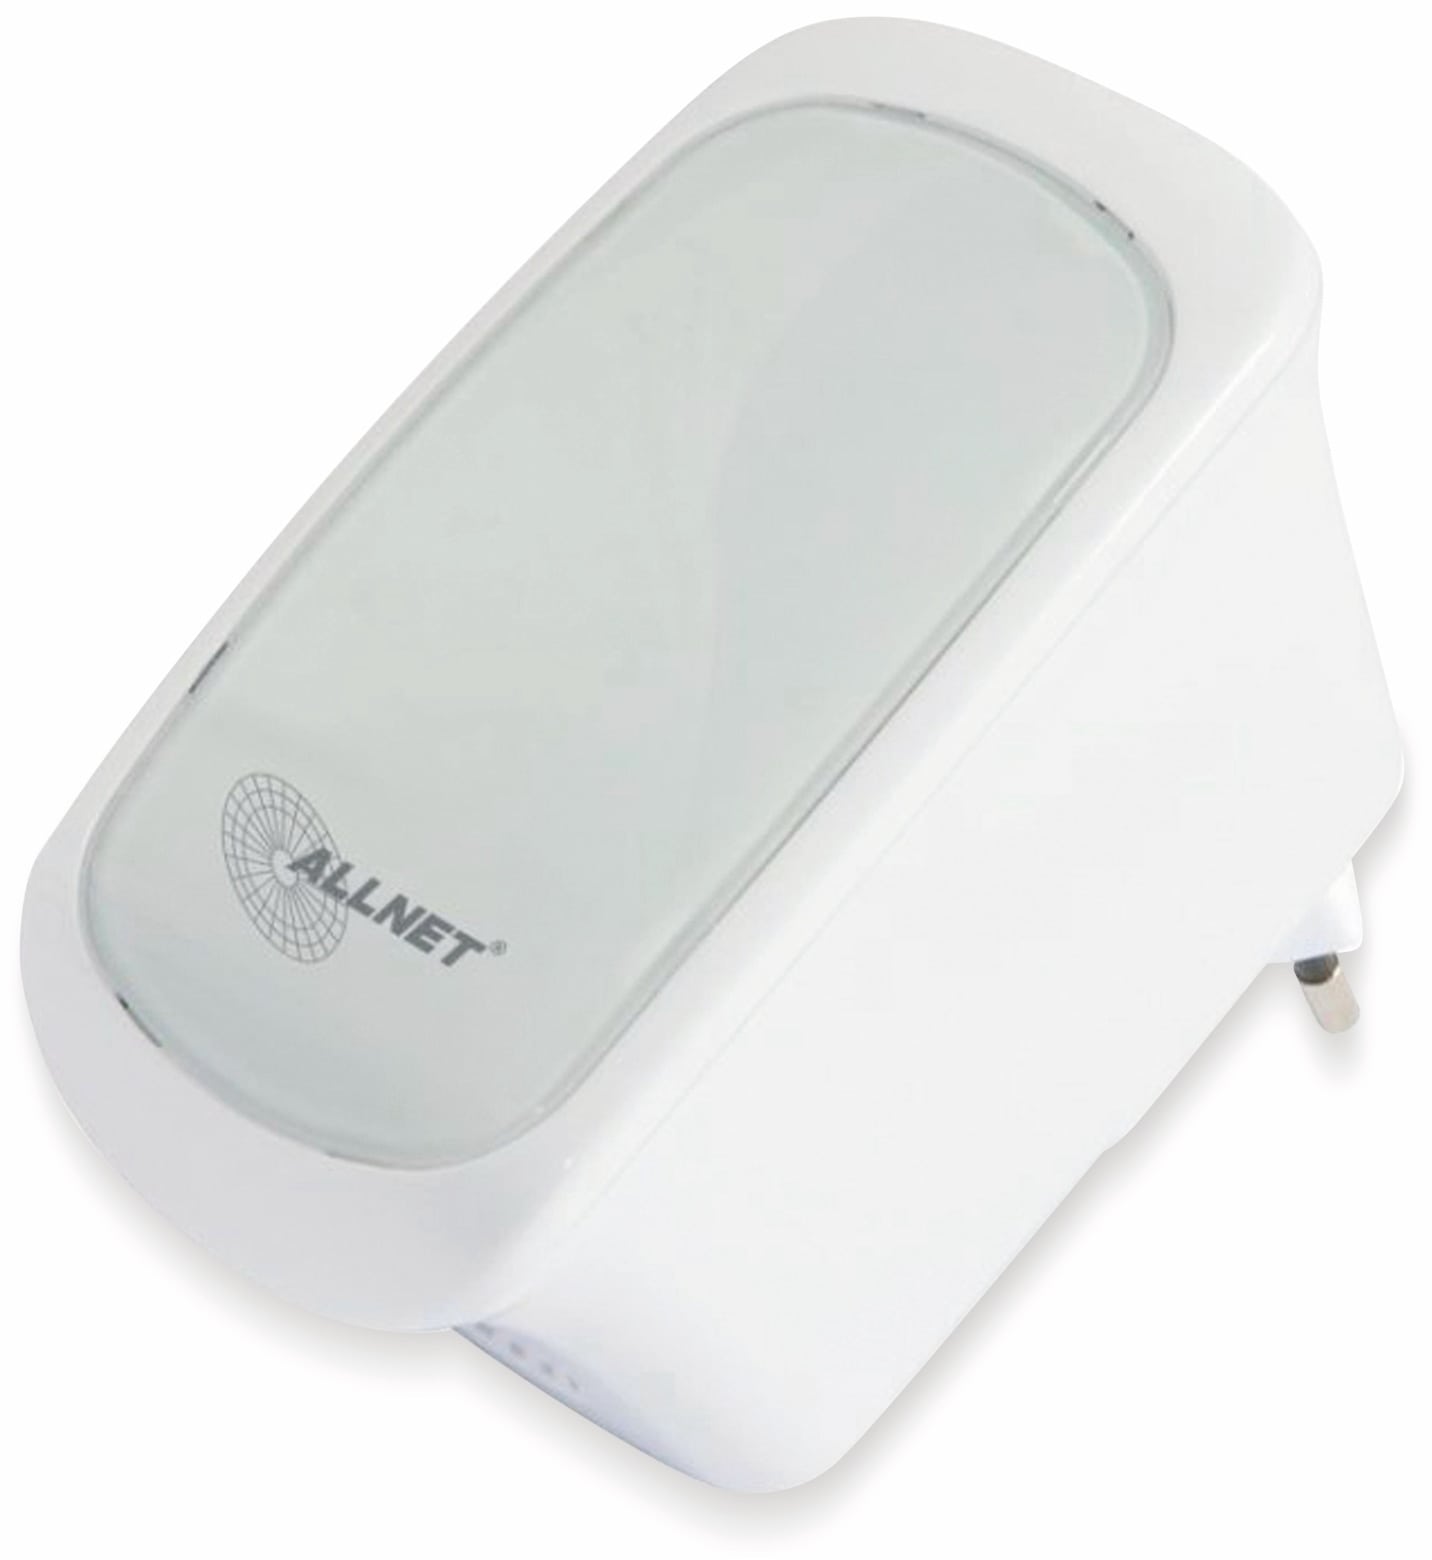 ALLNET WLAN-Repeater ALL0238RD, Dual-Band, 300 MBit/s